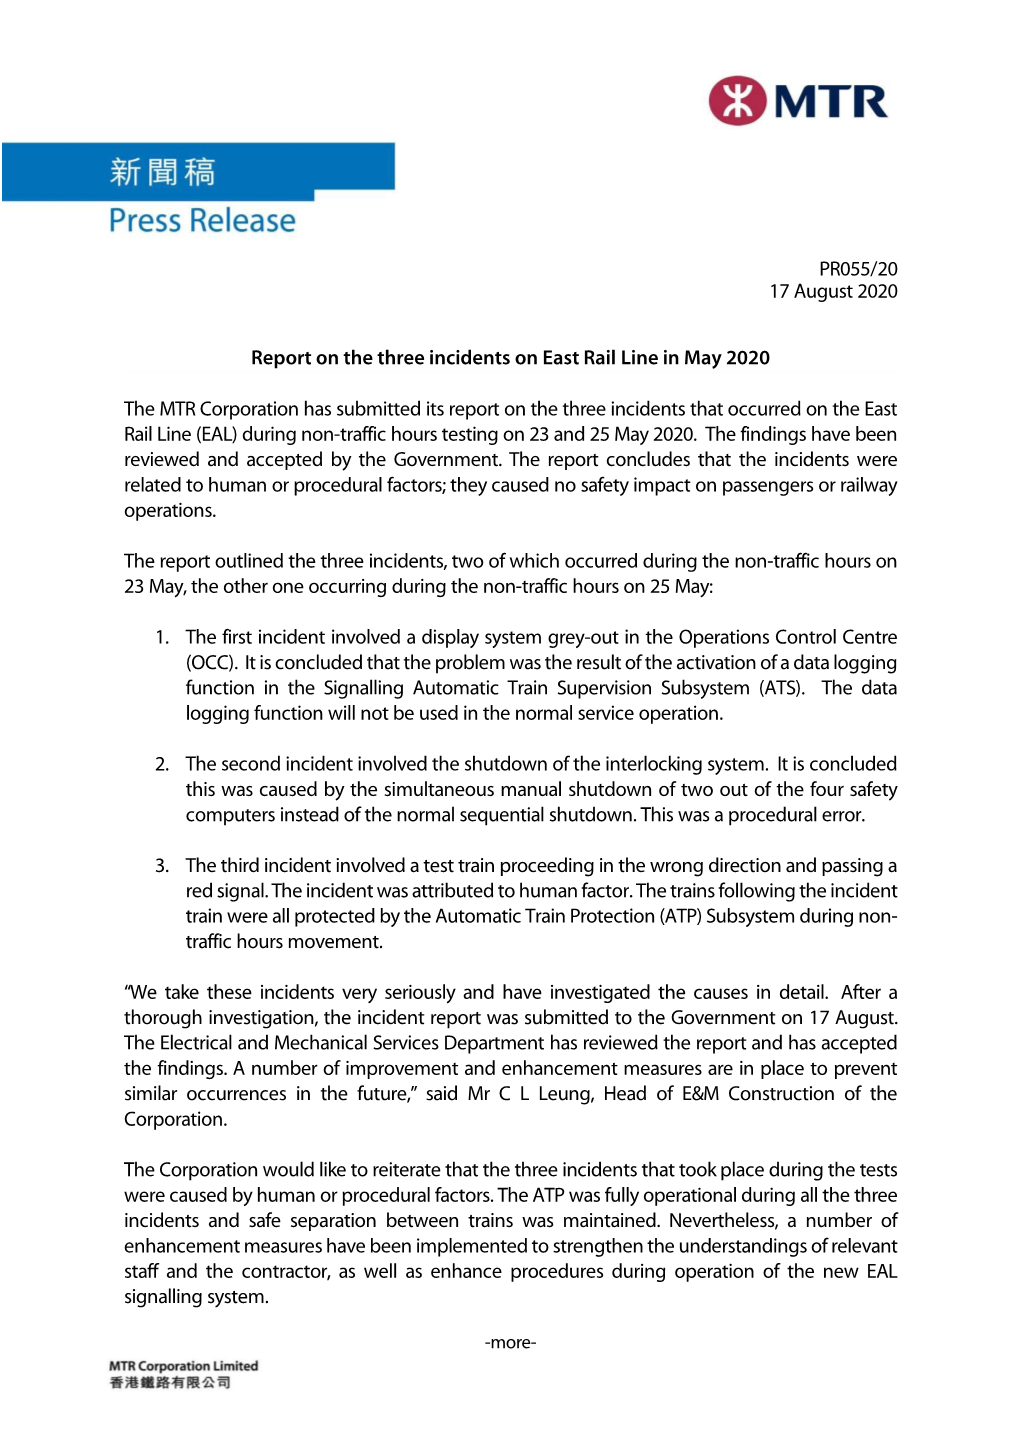 17 August 2020 Report on the Three Incidents on East Rail Line in May